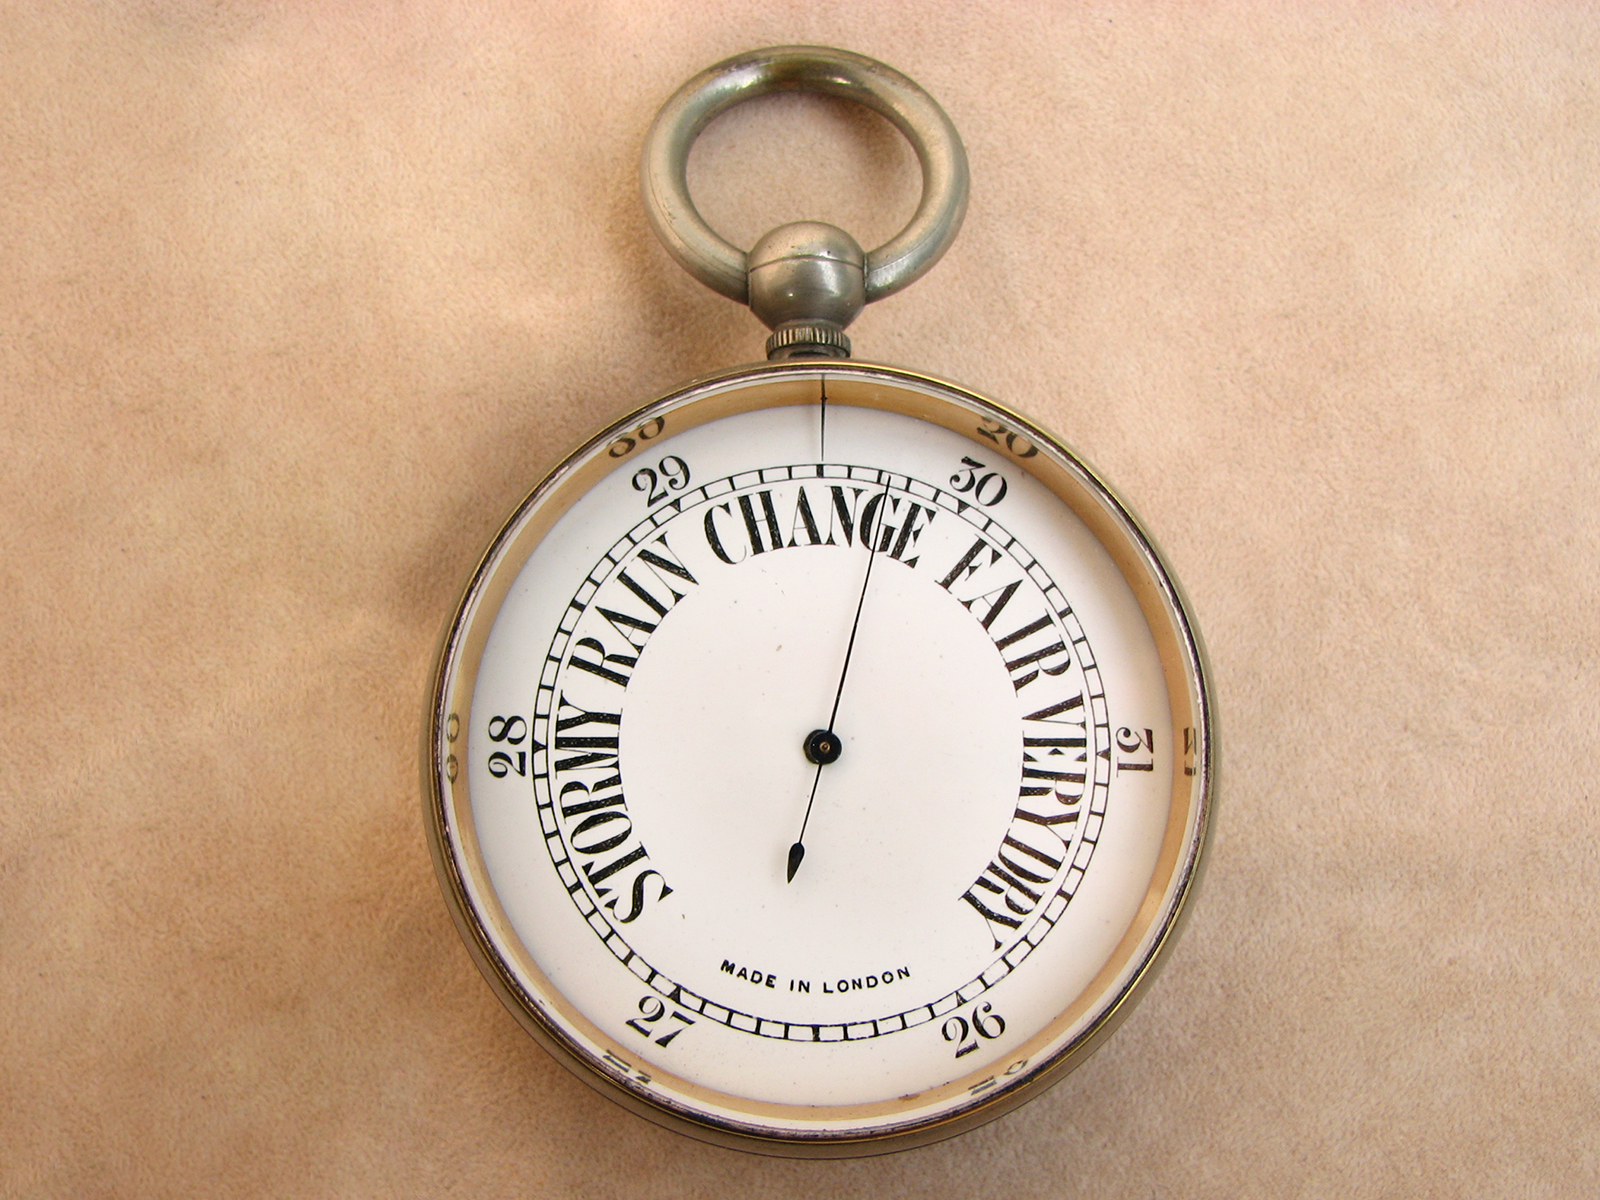 Early 20th century London made Goliath size pocket barometer